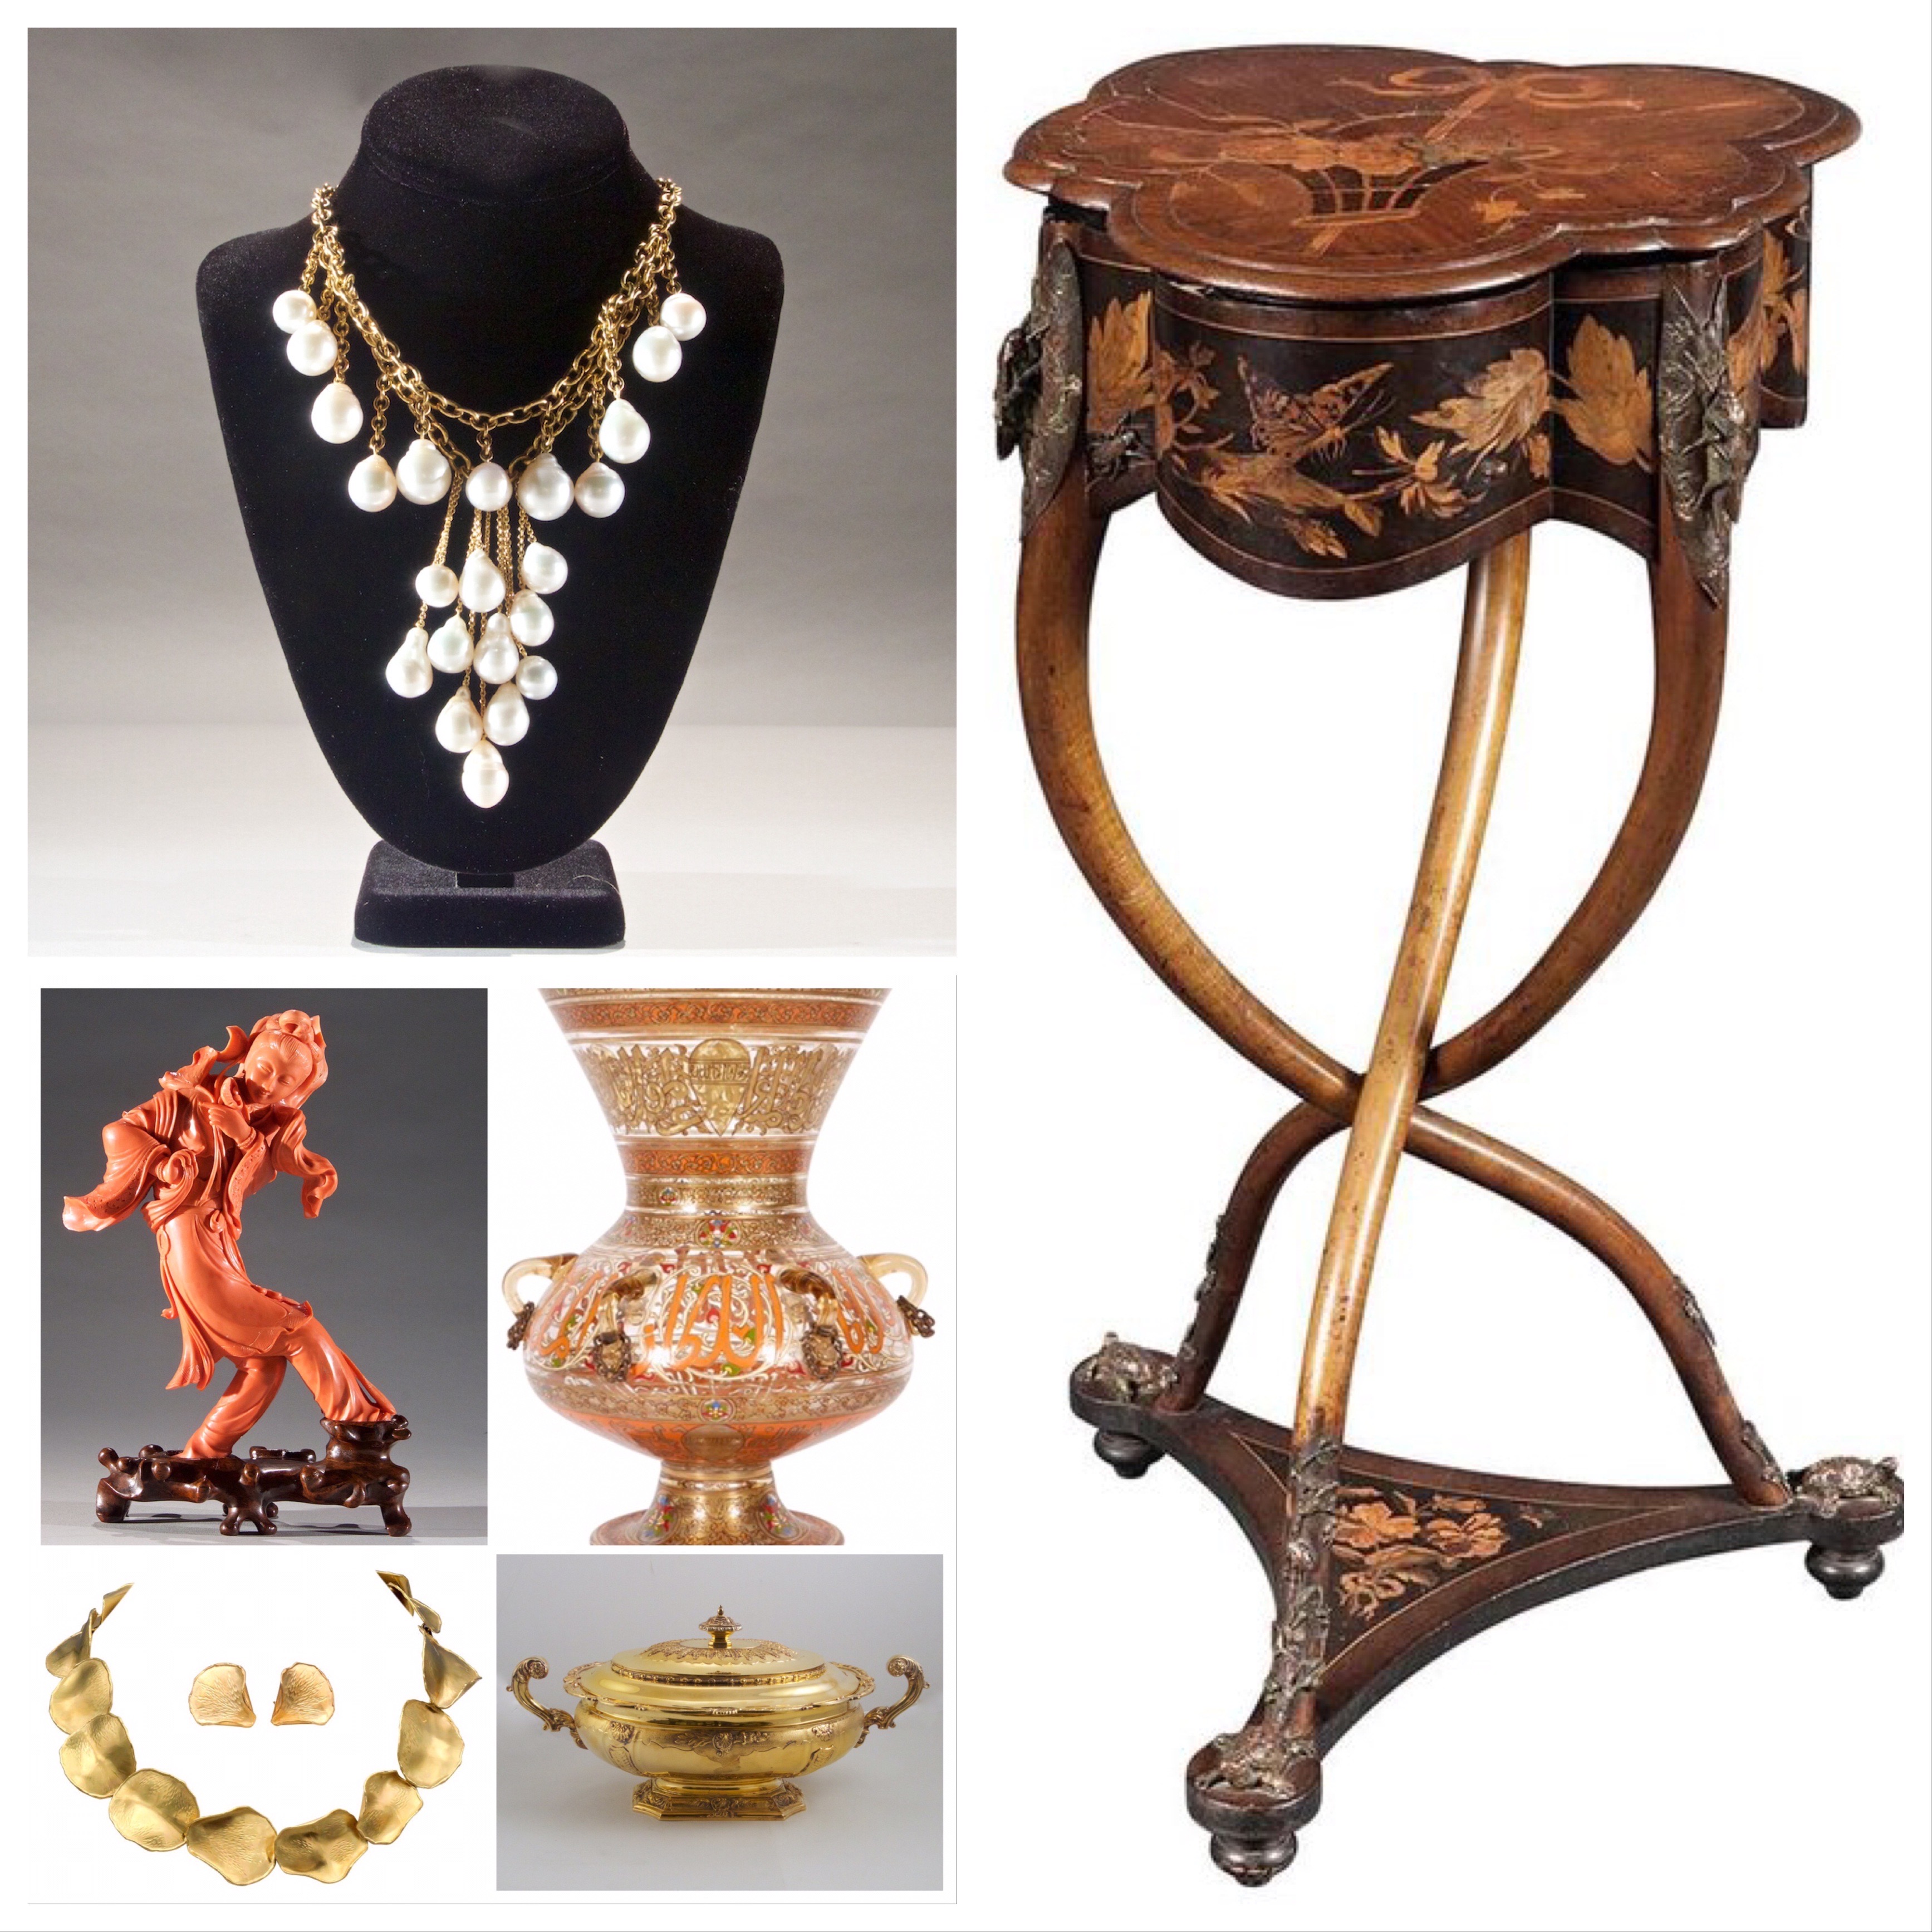 Antiques - Necklaces, Art Nouveau Marquetry Table, Mosque Lamp and Tureen